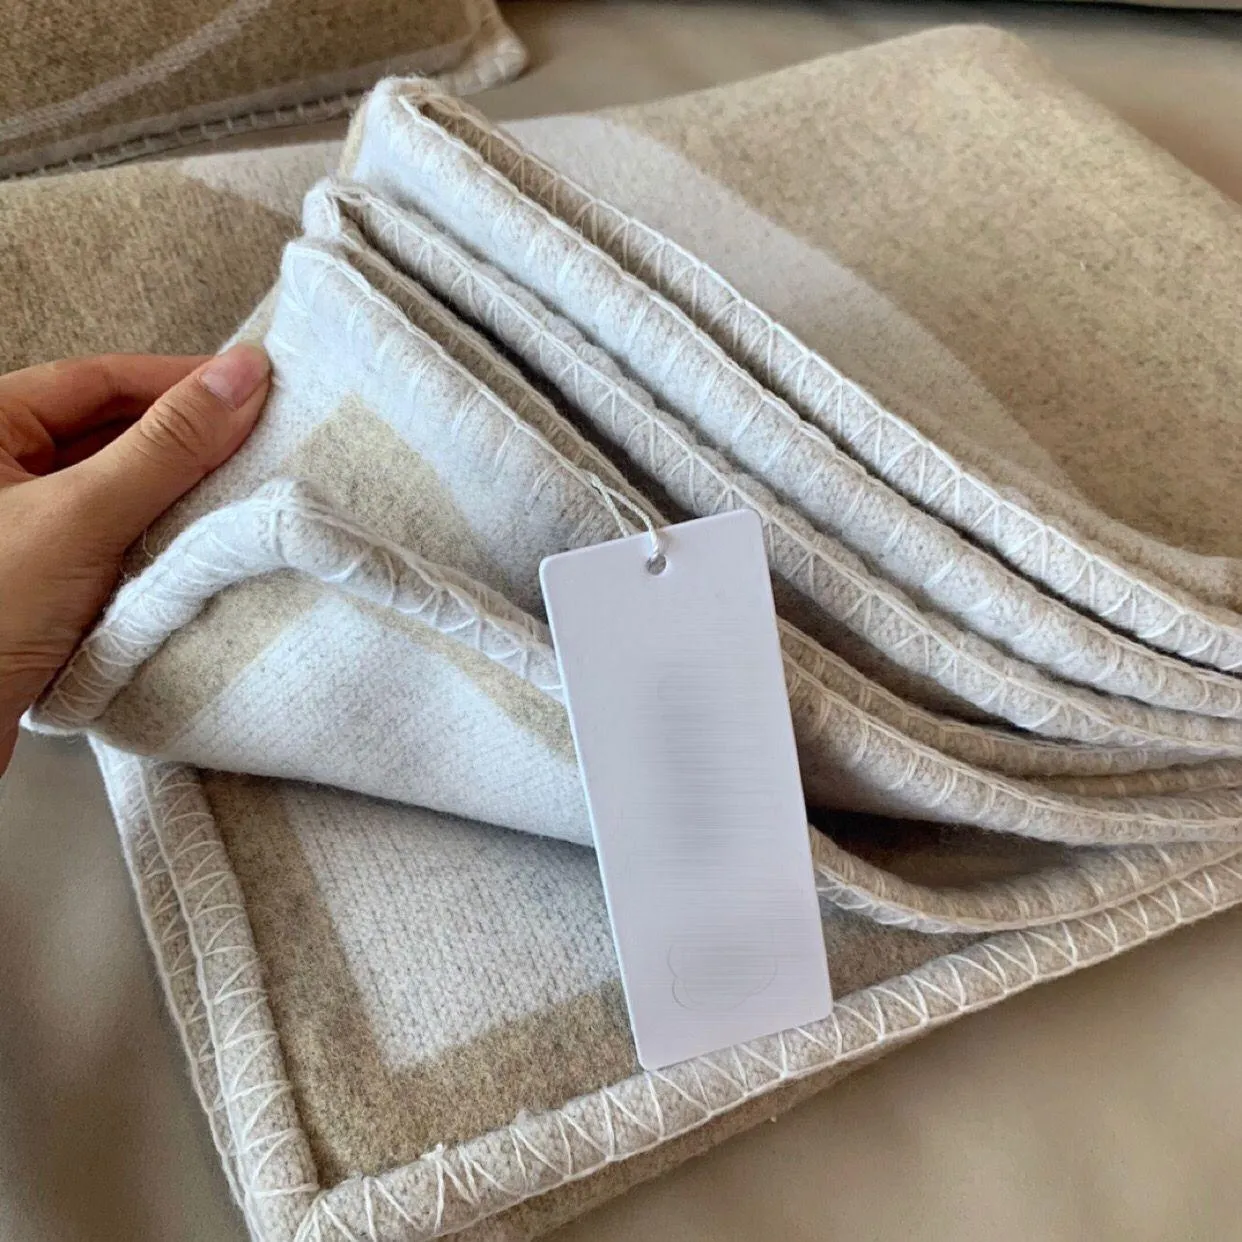 Blanket Luxury Signage real cashmere wool classic thicken warm blankets large size 135 170cm for home travel vacation crea2678